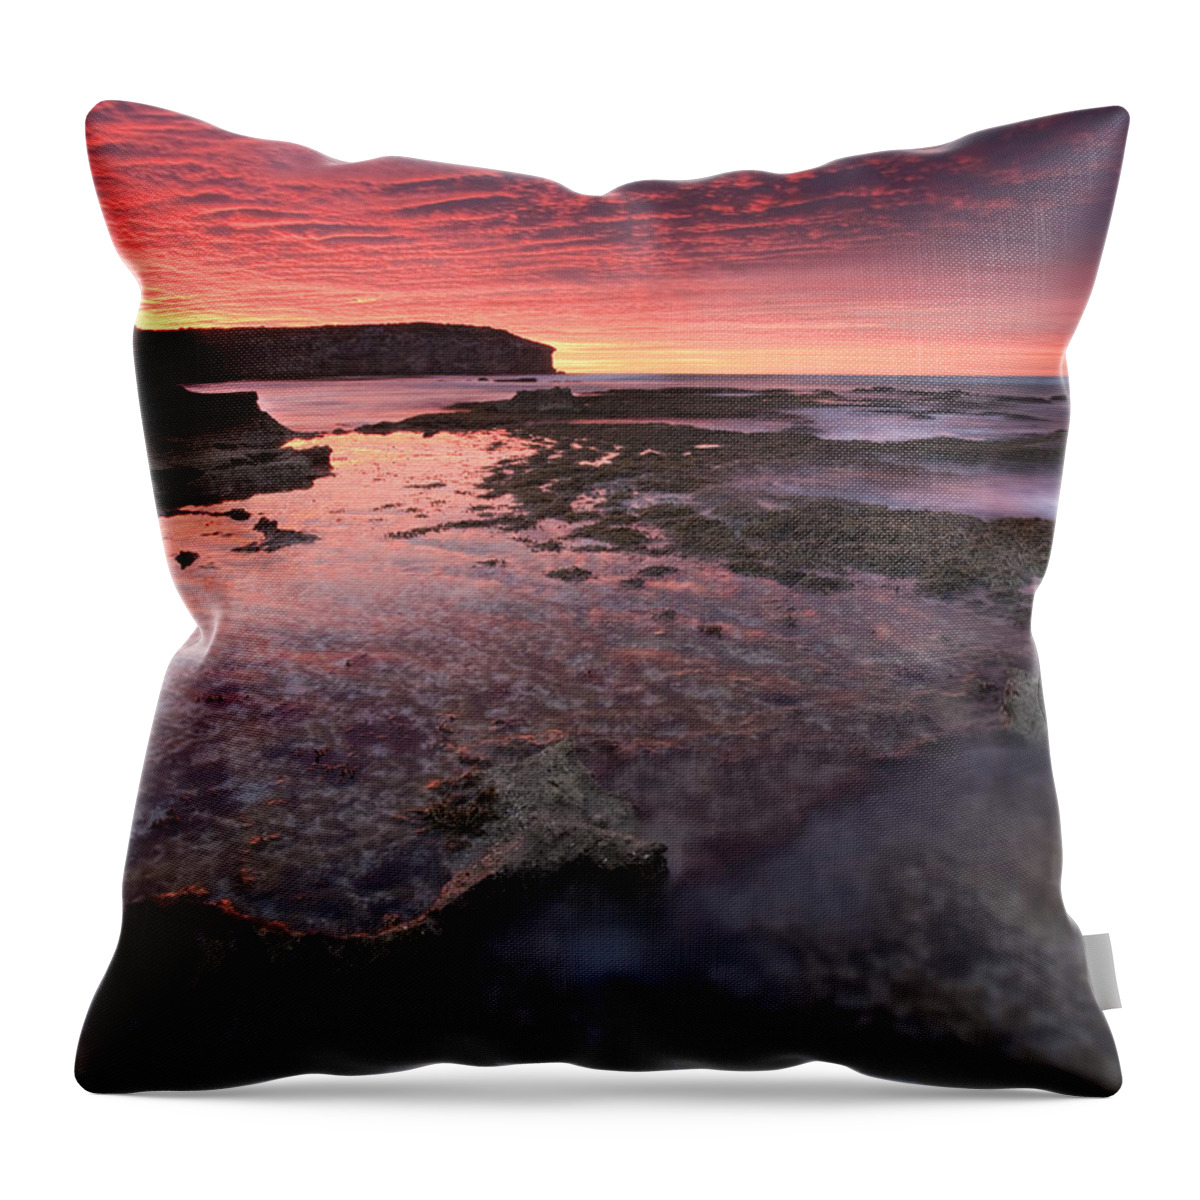 Sunrise Throw Pillow featuring the photograph Red Sky At Morning #1 by Michael Dawson